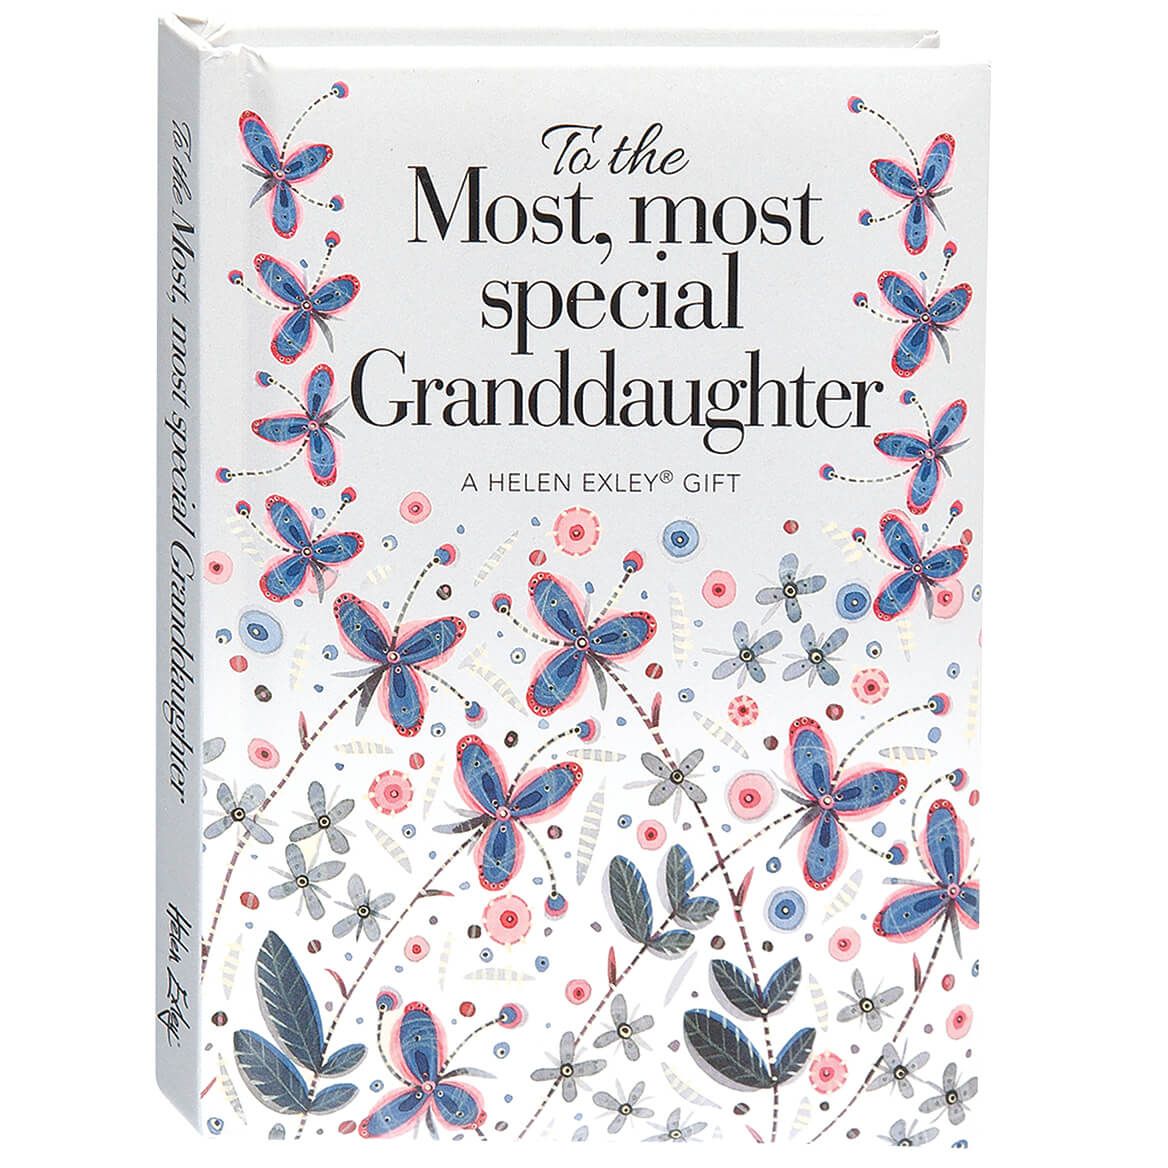 To The Most, Most Special Granddaughter + '-' + 376248